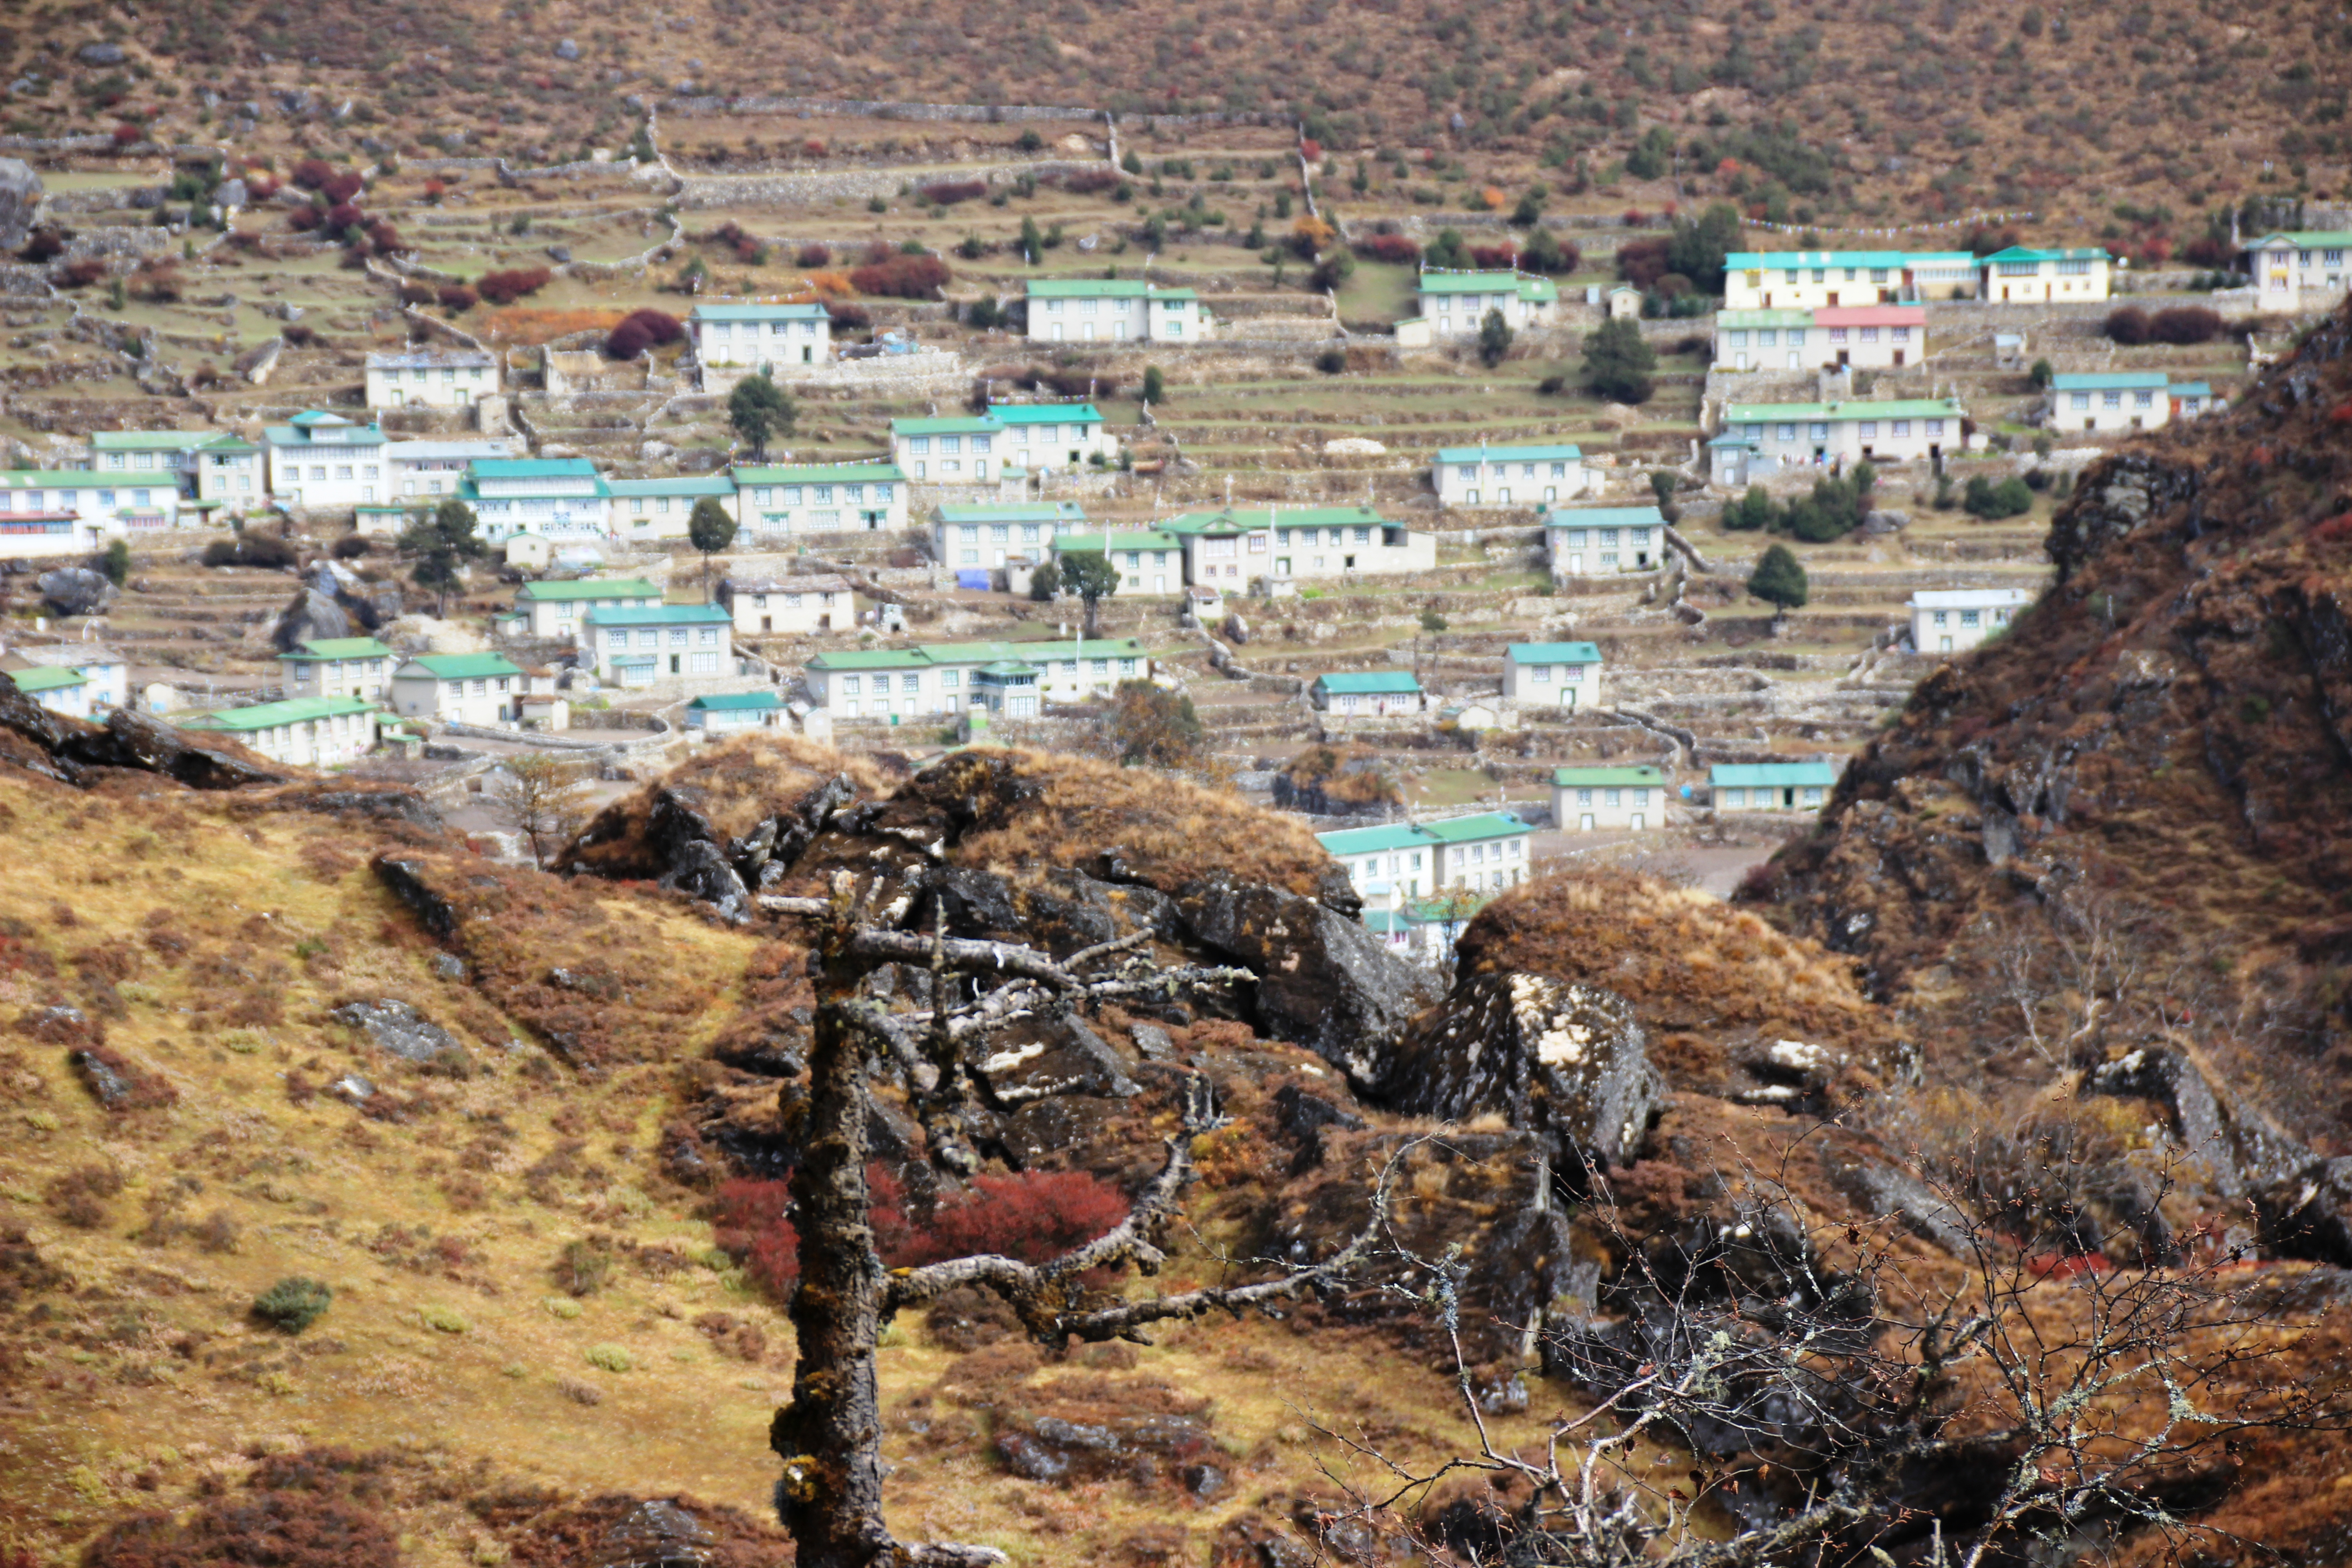 View of Khumjung